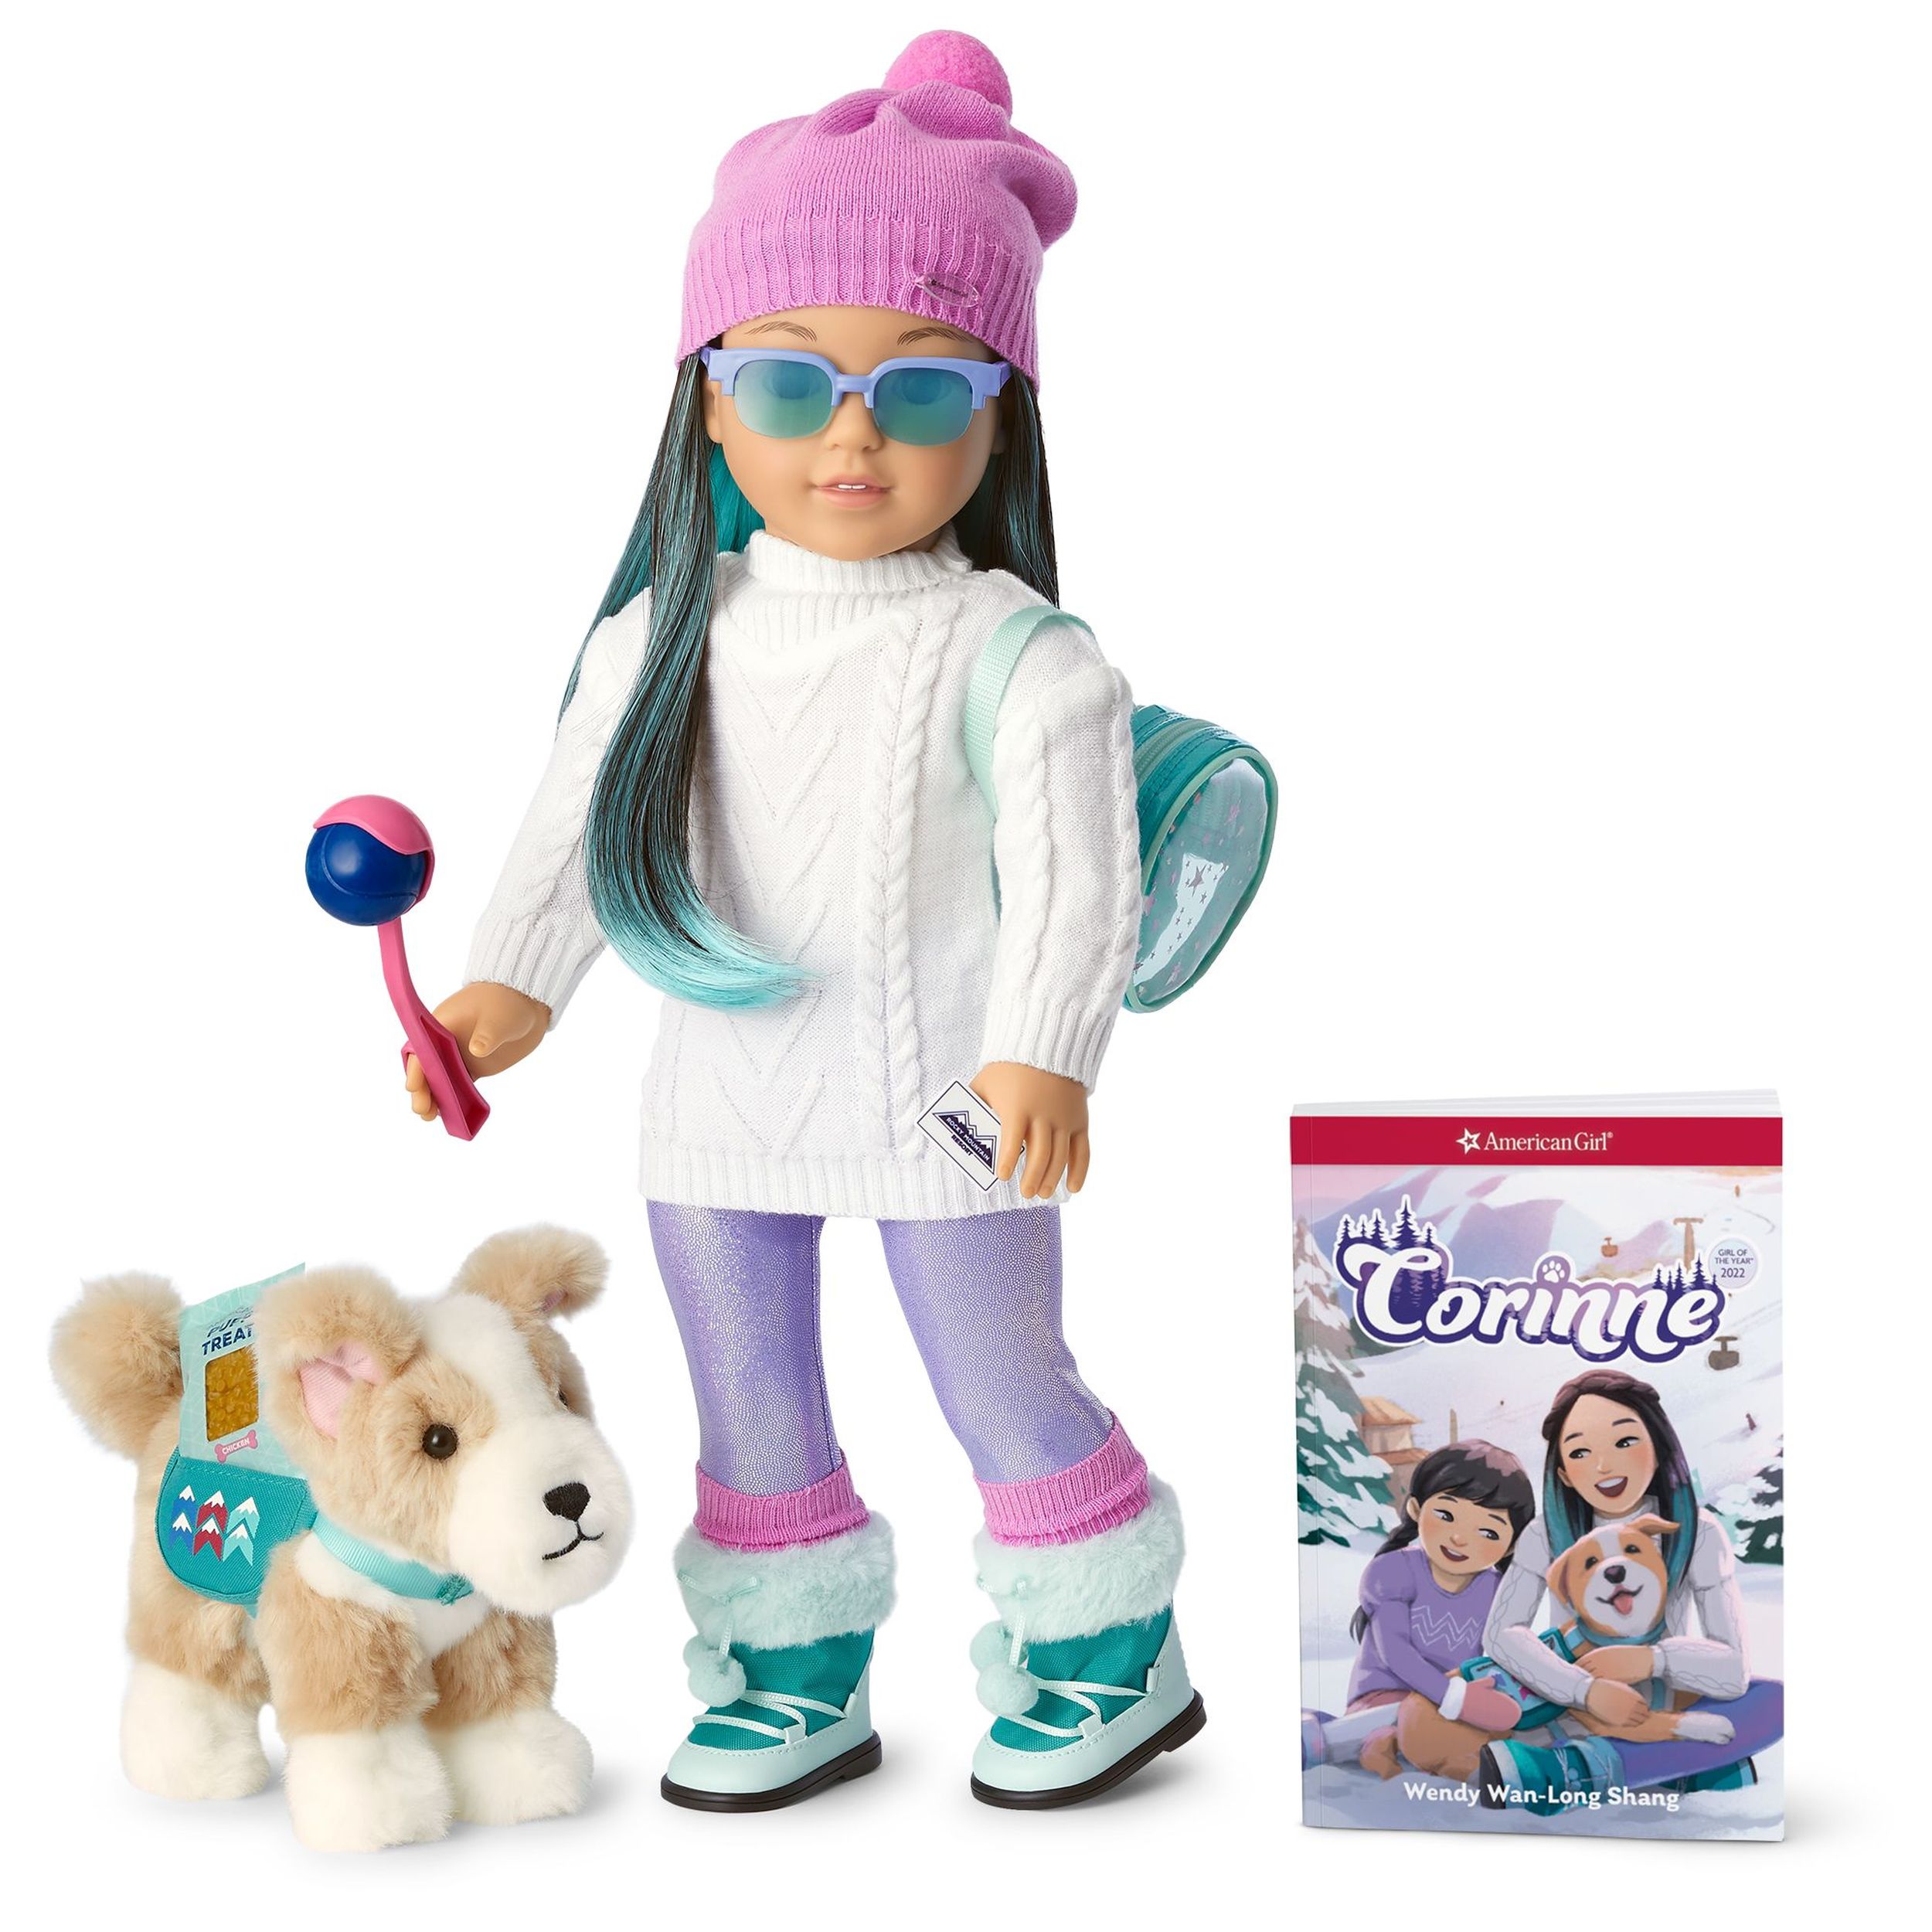 New American Girl doll for 2022 is a Chinese-American, the first since Ivy  Ling was discontinued in 2014 and 1 of 6 of Asian descent